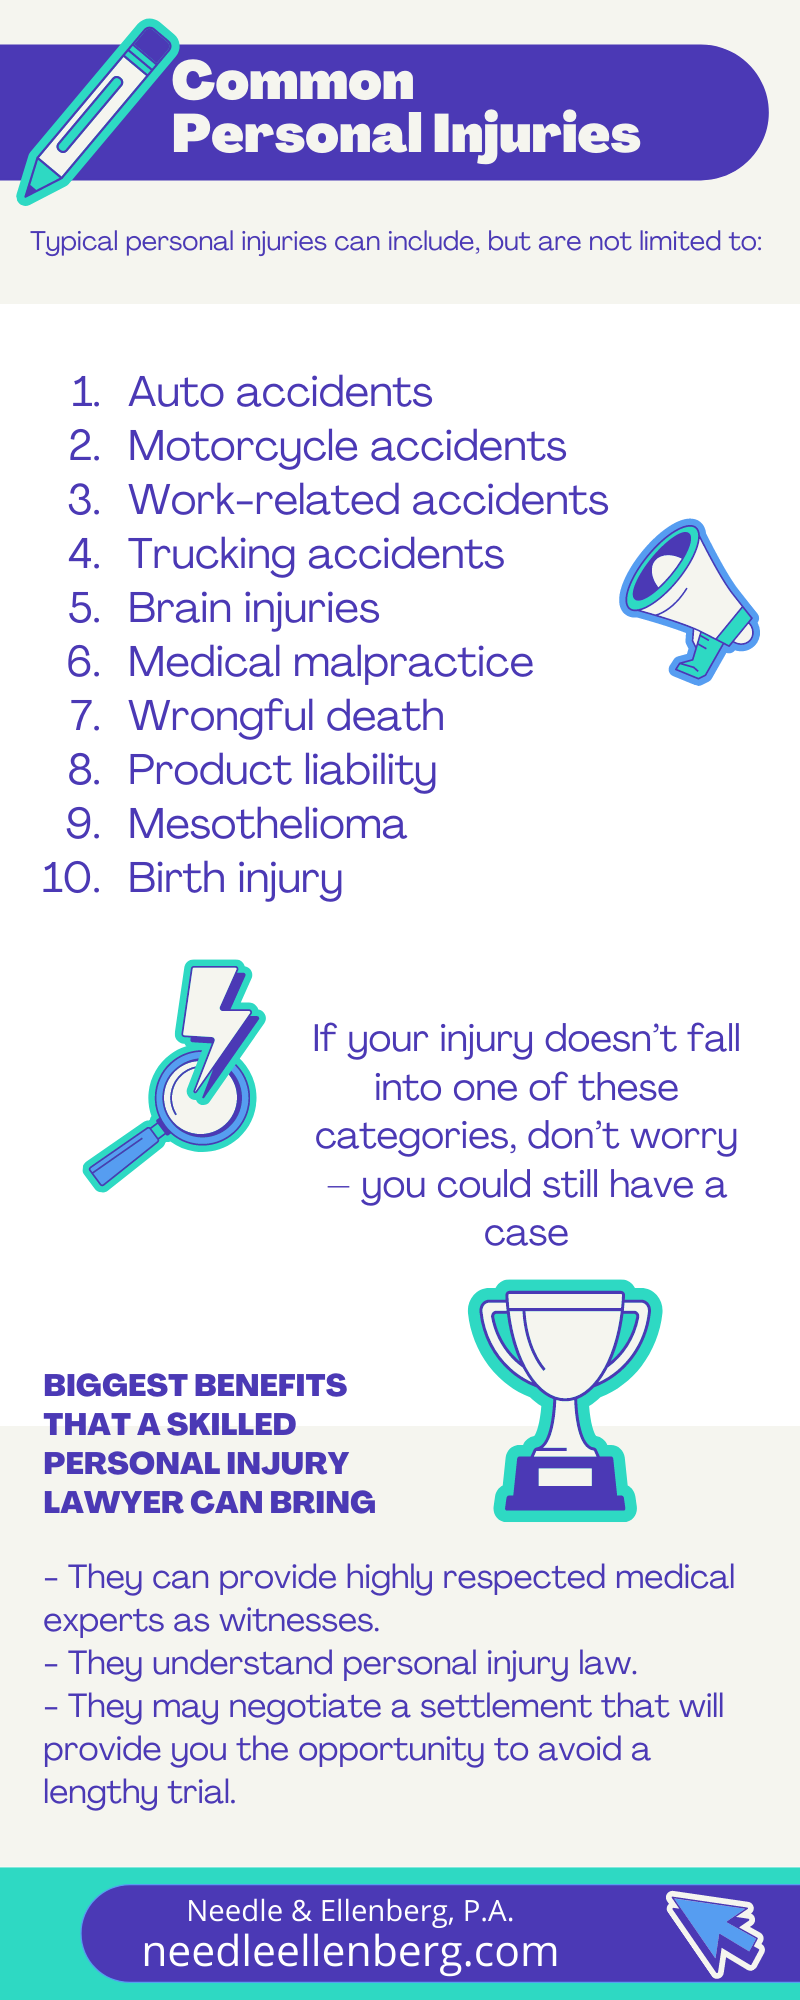 Common Personal Injuries infographic